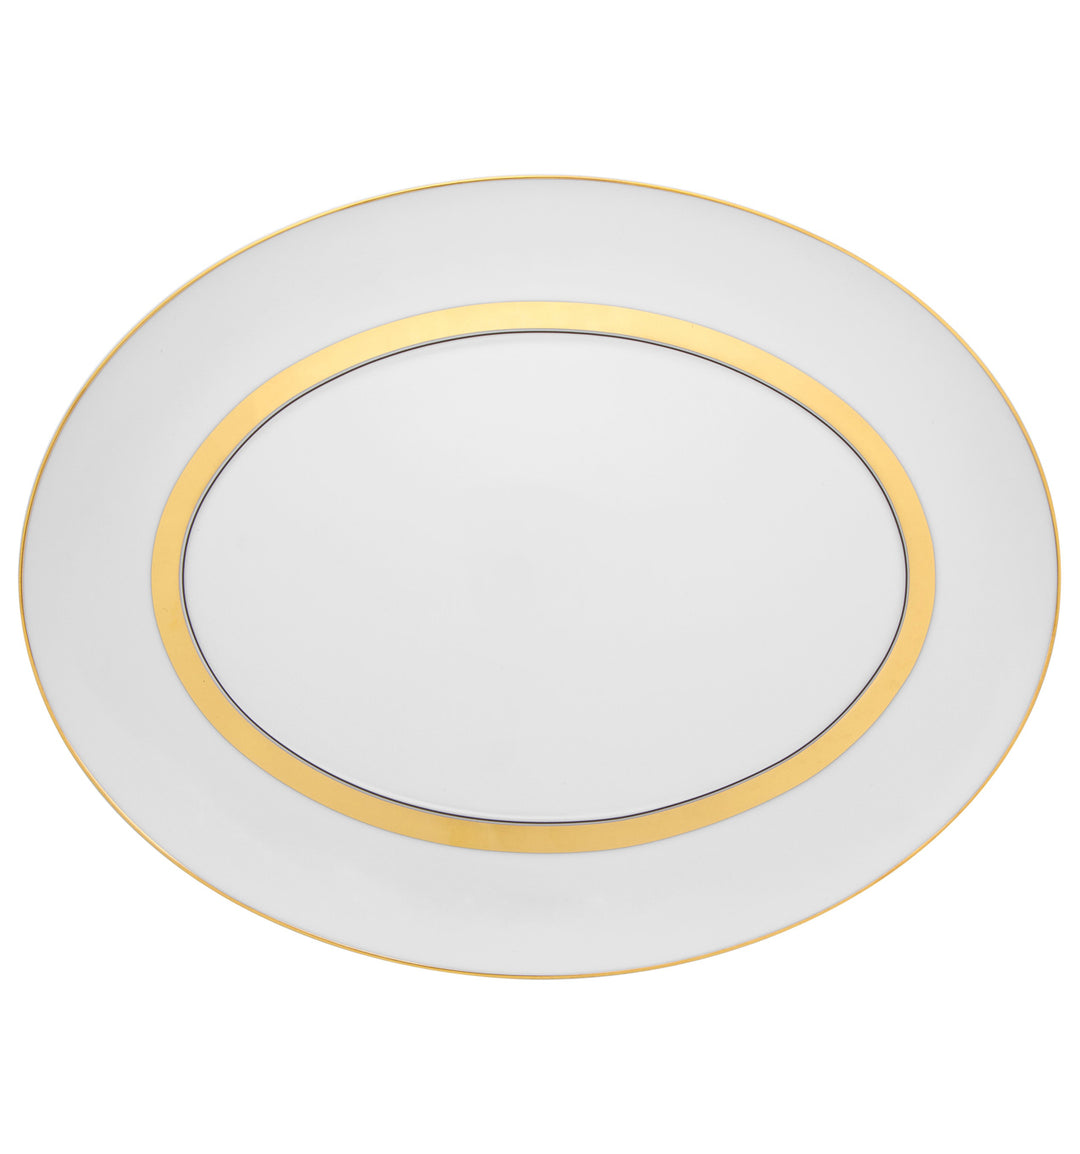 Domo Gold - SMALL OVAL PLATTER